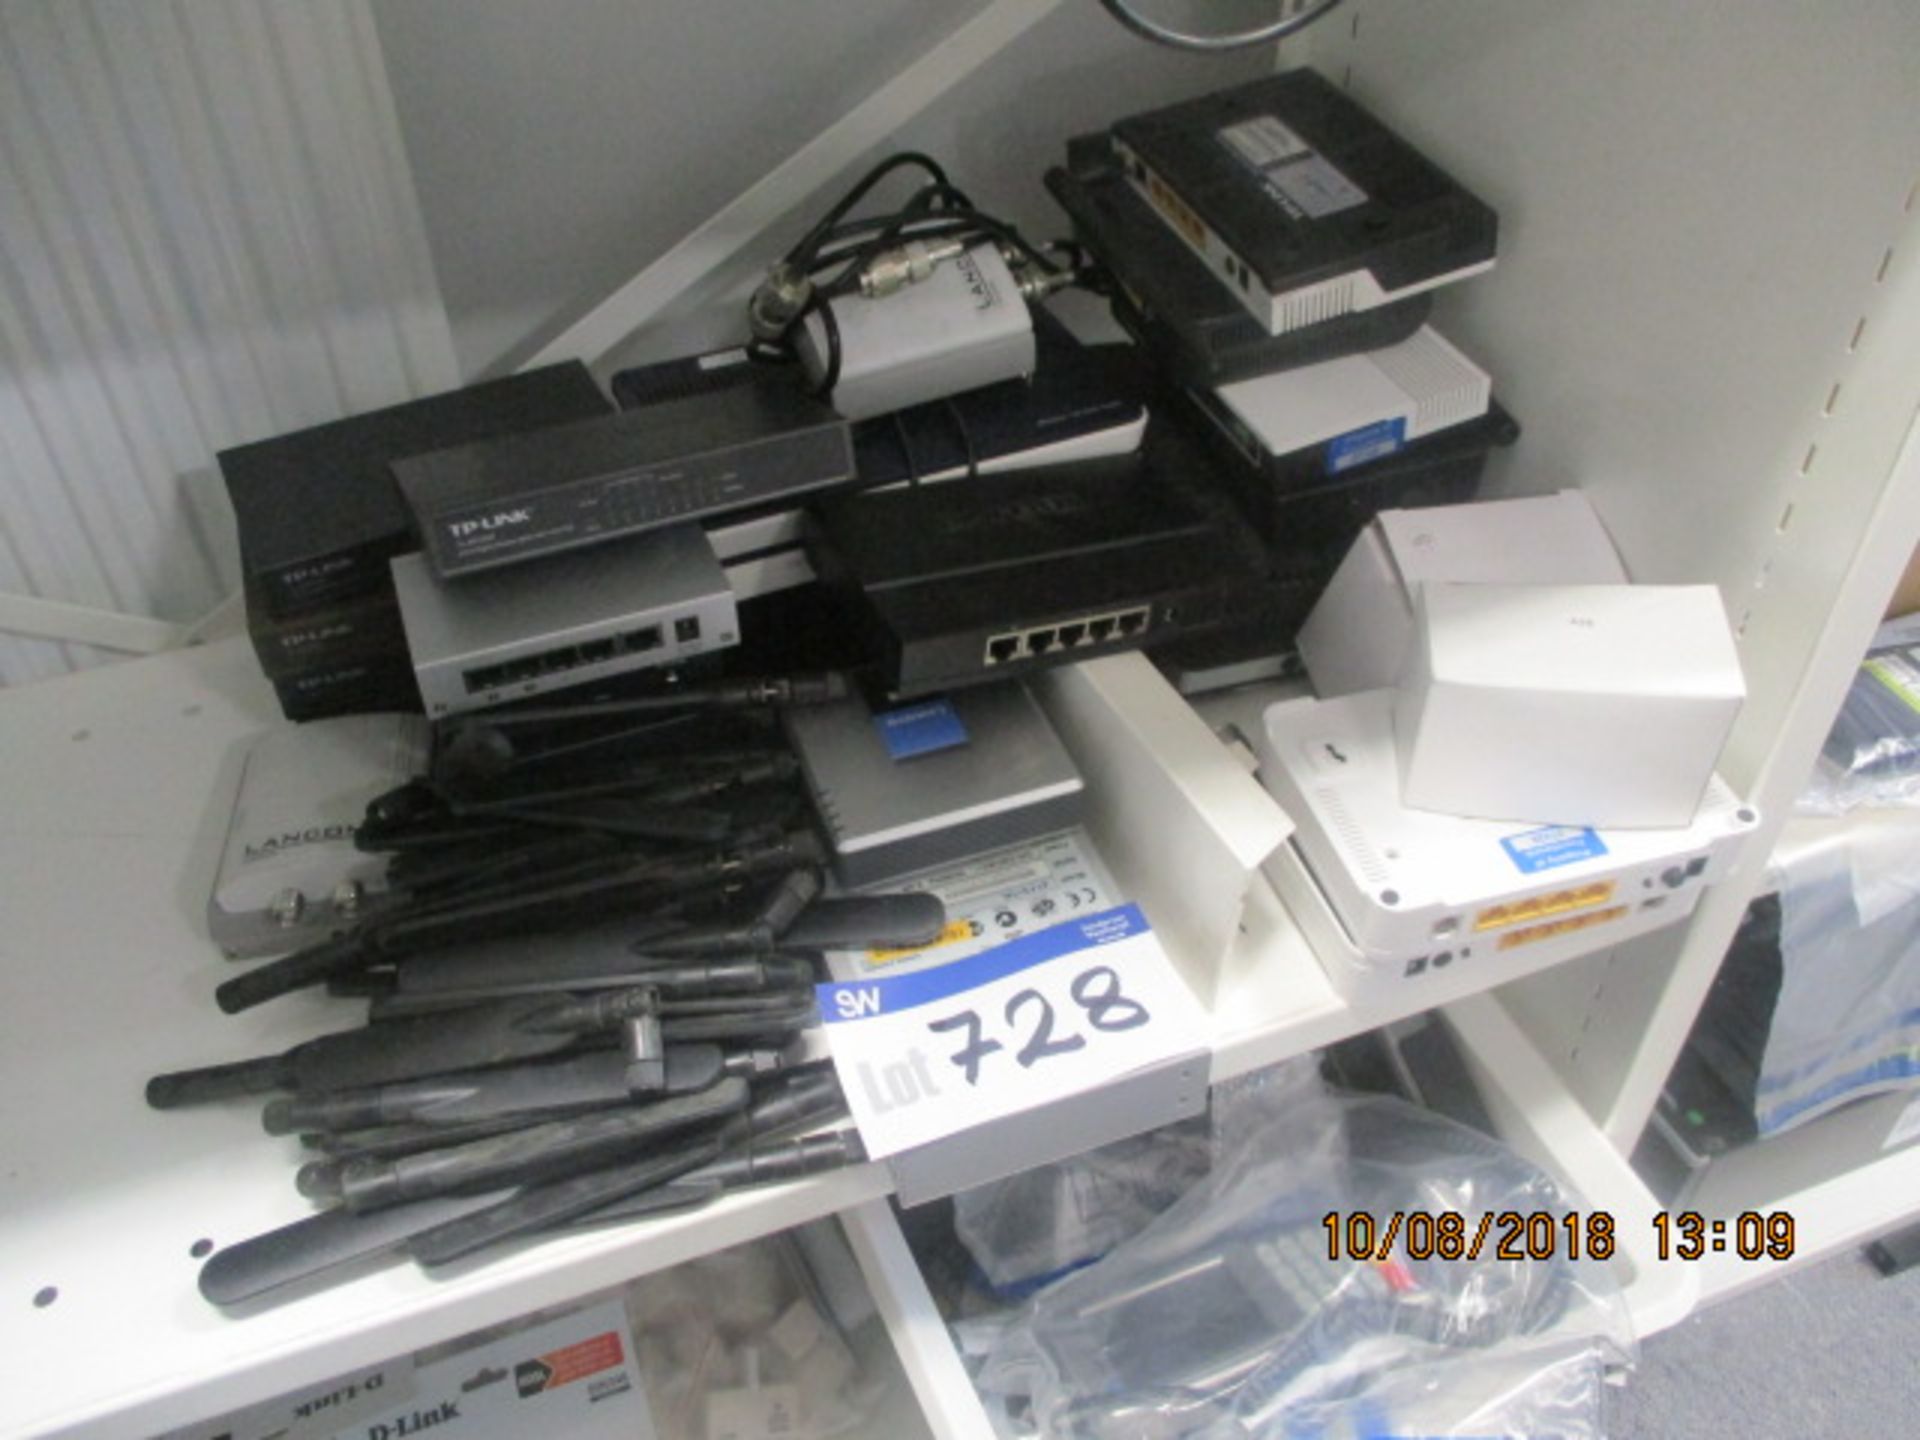 Assorted Switches and Routers, as set out on shelf